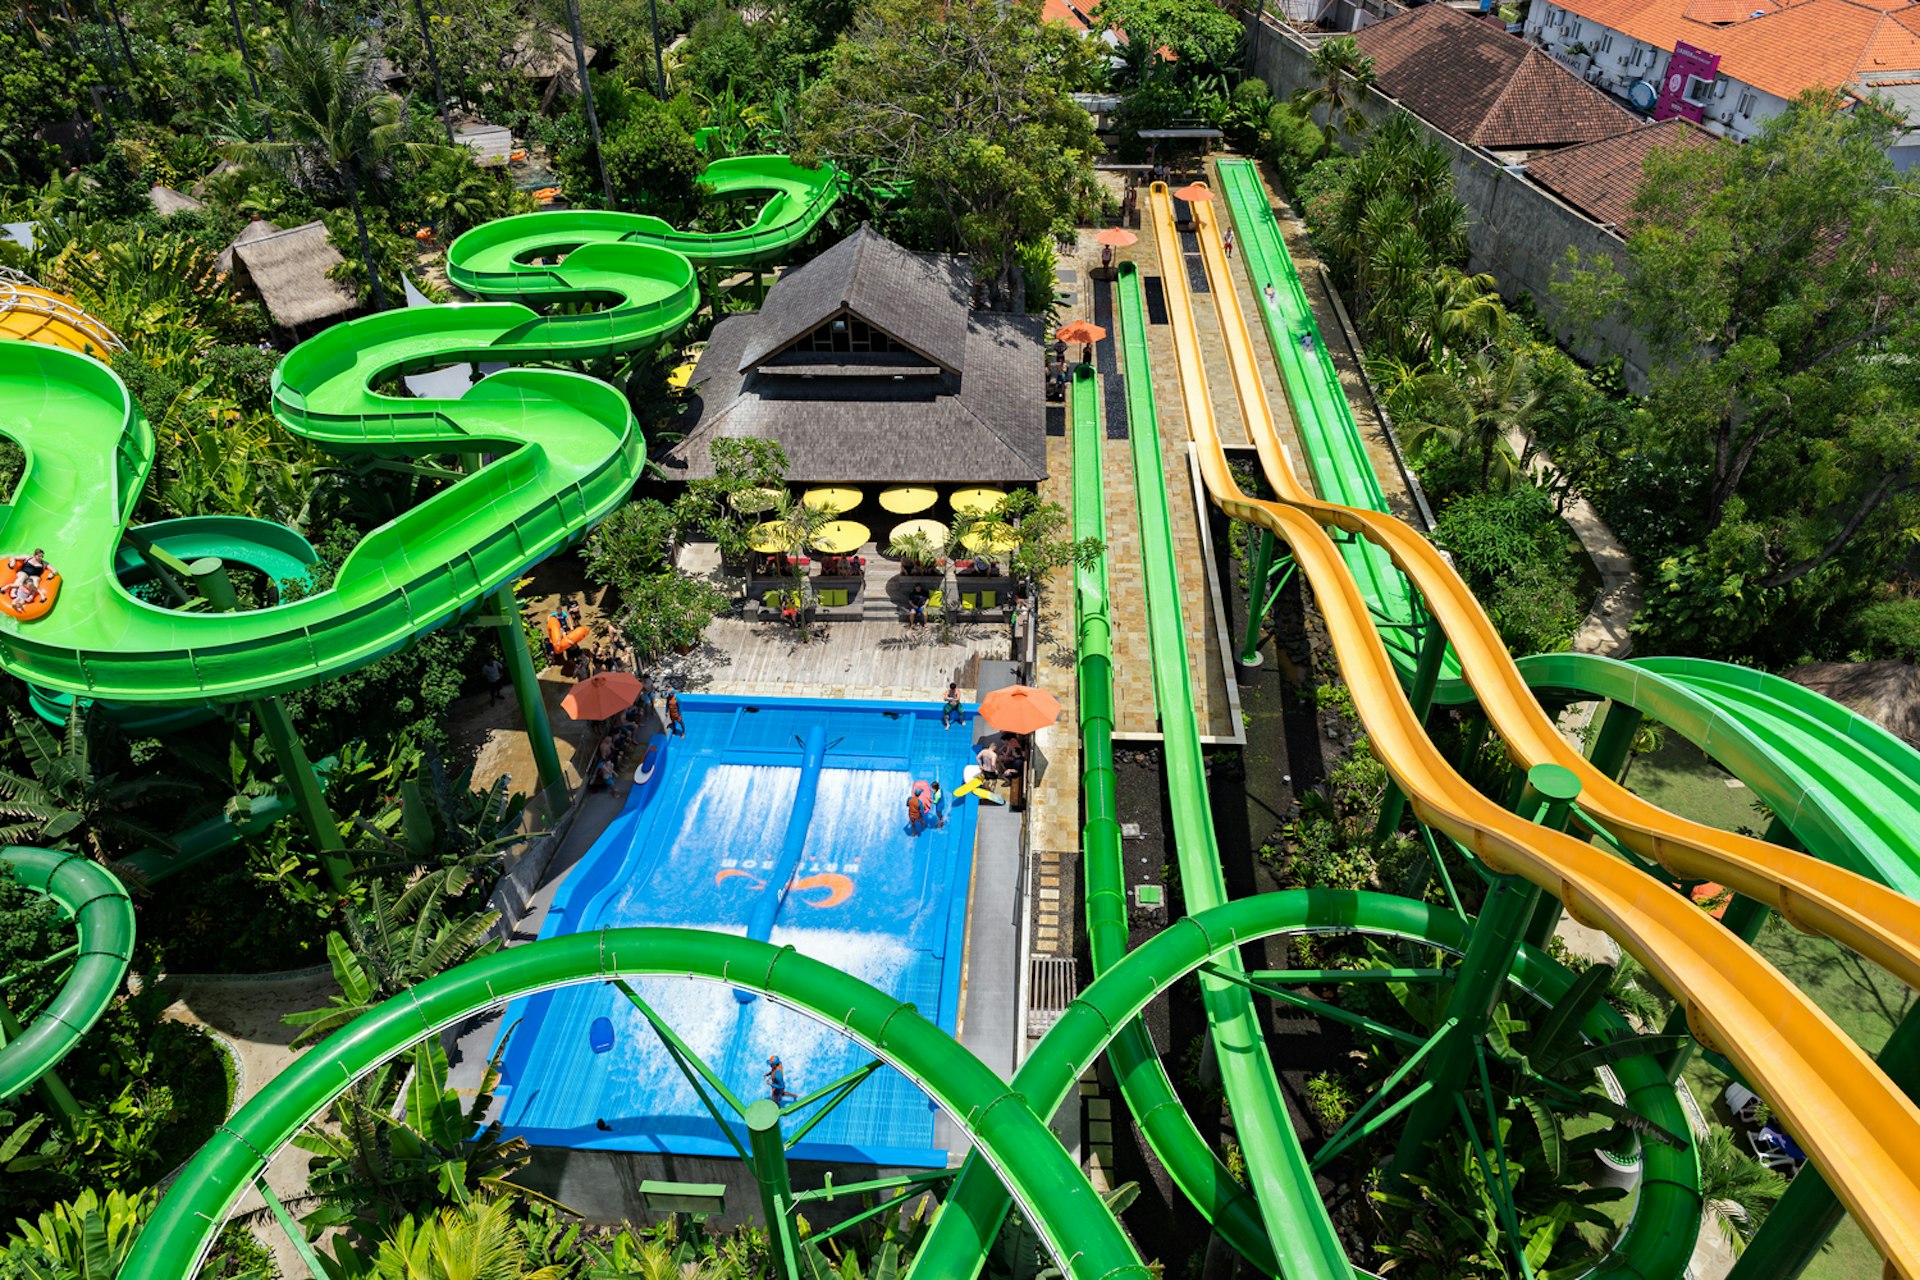 Coasters, waterslides and water rides in a water park